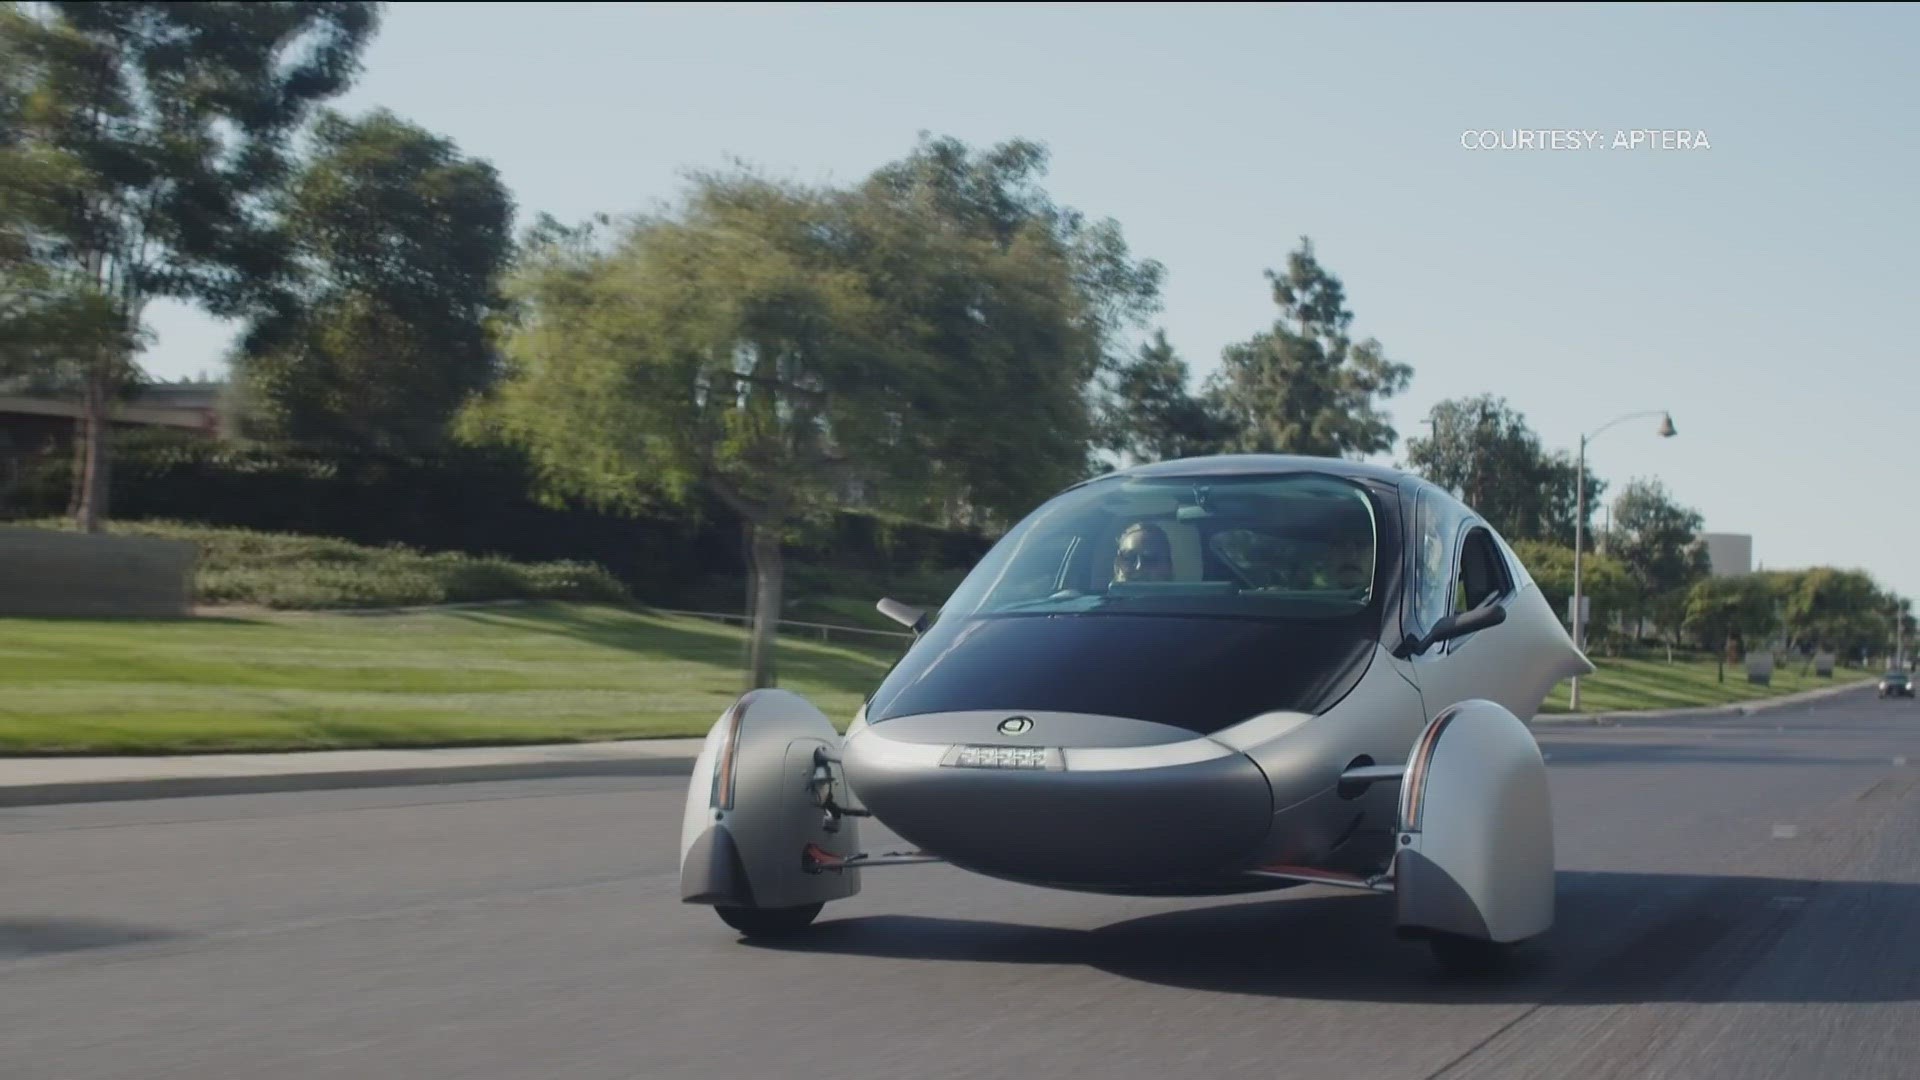 The Carlsbad company producing the car says their goal is to redefine transportation in a more innovative and sustainable way.